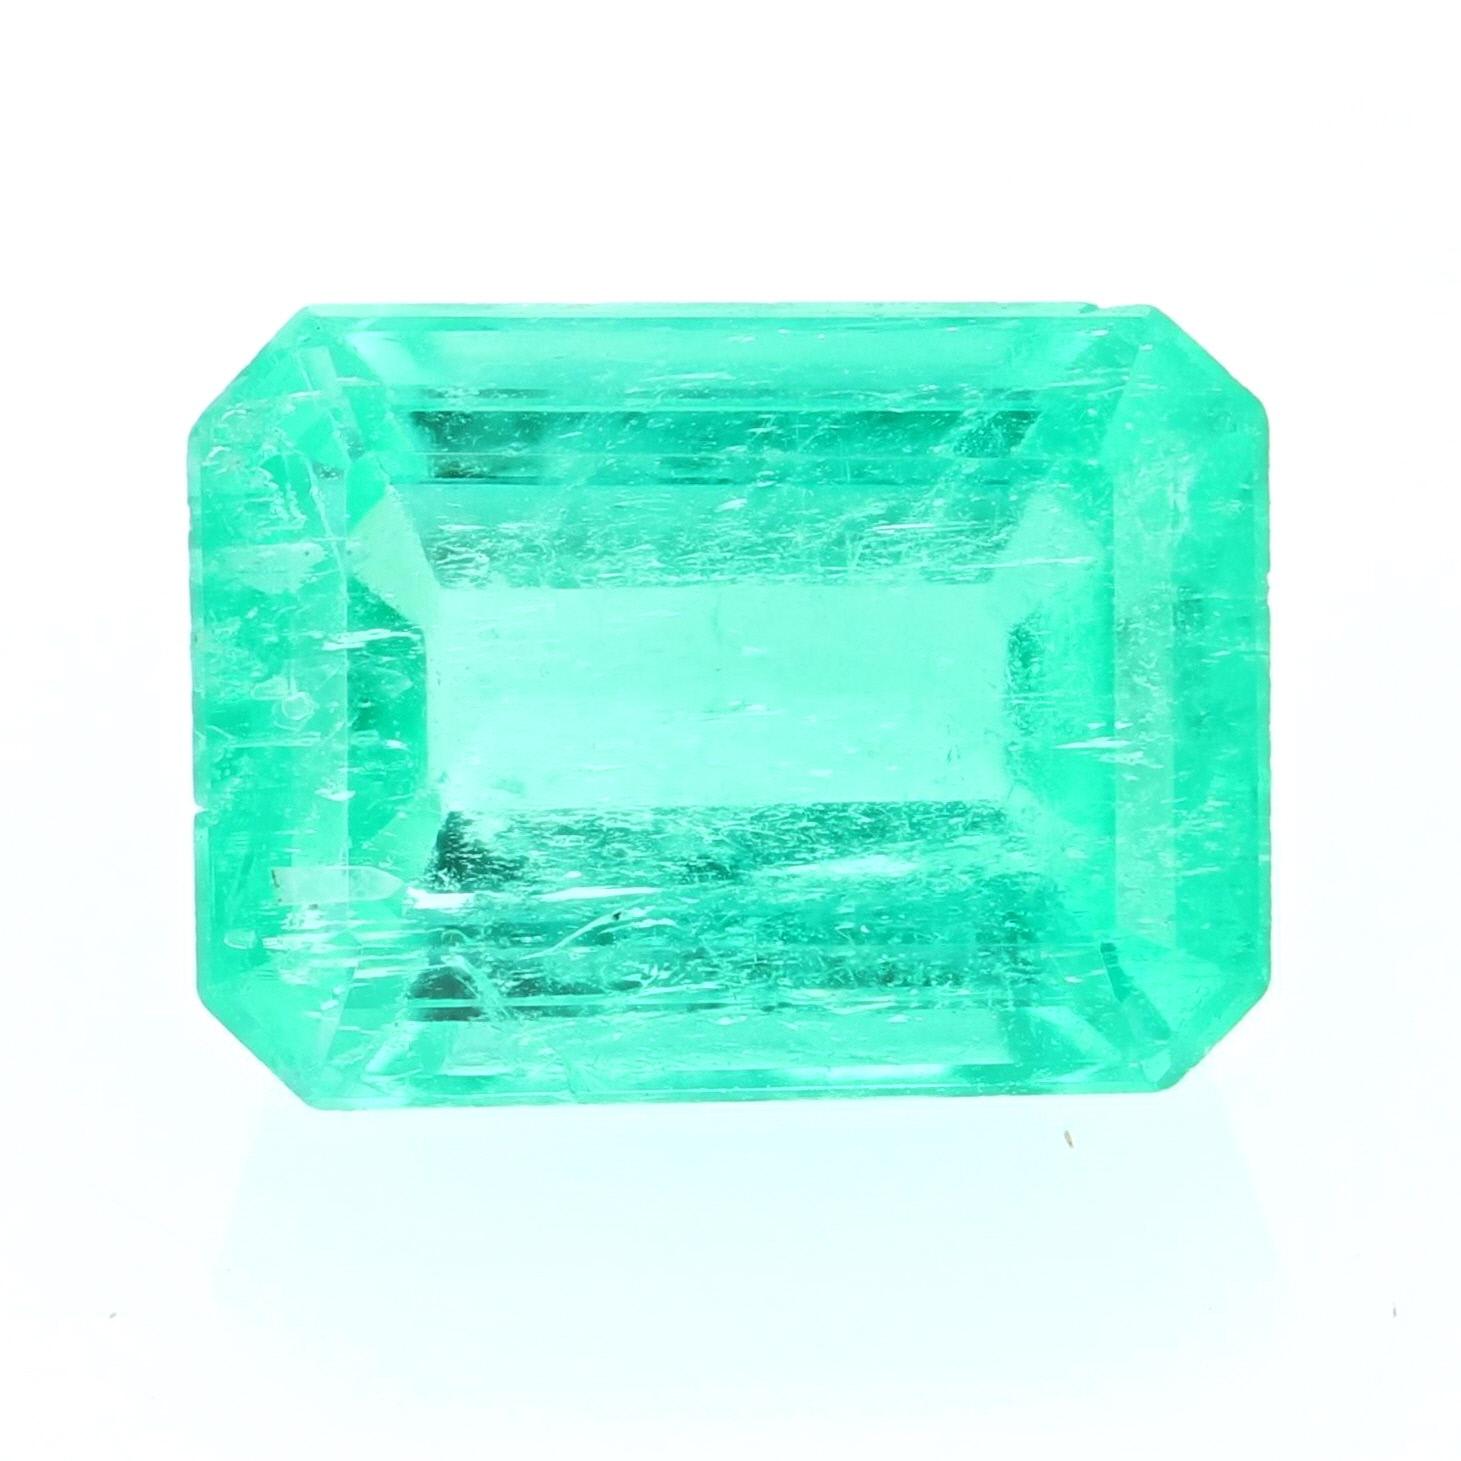 Weight: 2.08ct
Treatment: Oiling
Cut: Emerald 
Color: Green   
Origin: Columbia
Dimensions (mm): 8.60 x 6.40 x 4.88 

GIA Report Number: 6214169392 

Condition: New  

Please check out the enlarged pictures.

Thank you for taking the time to read